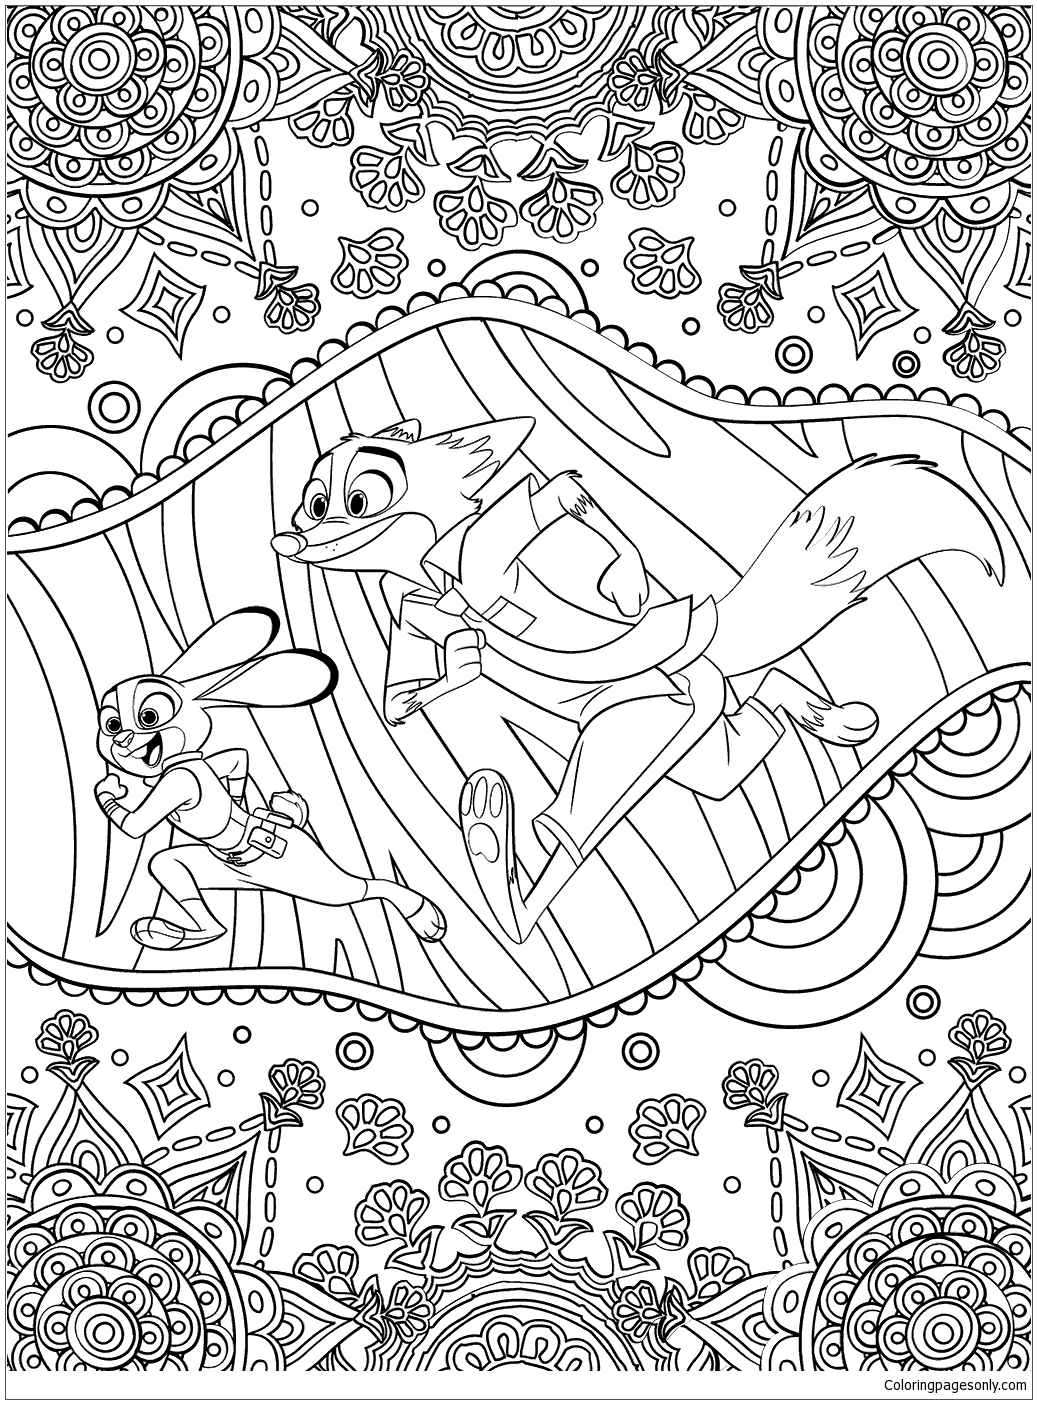 Zootopia For Adults Coloring Pages